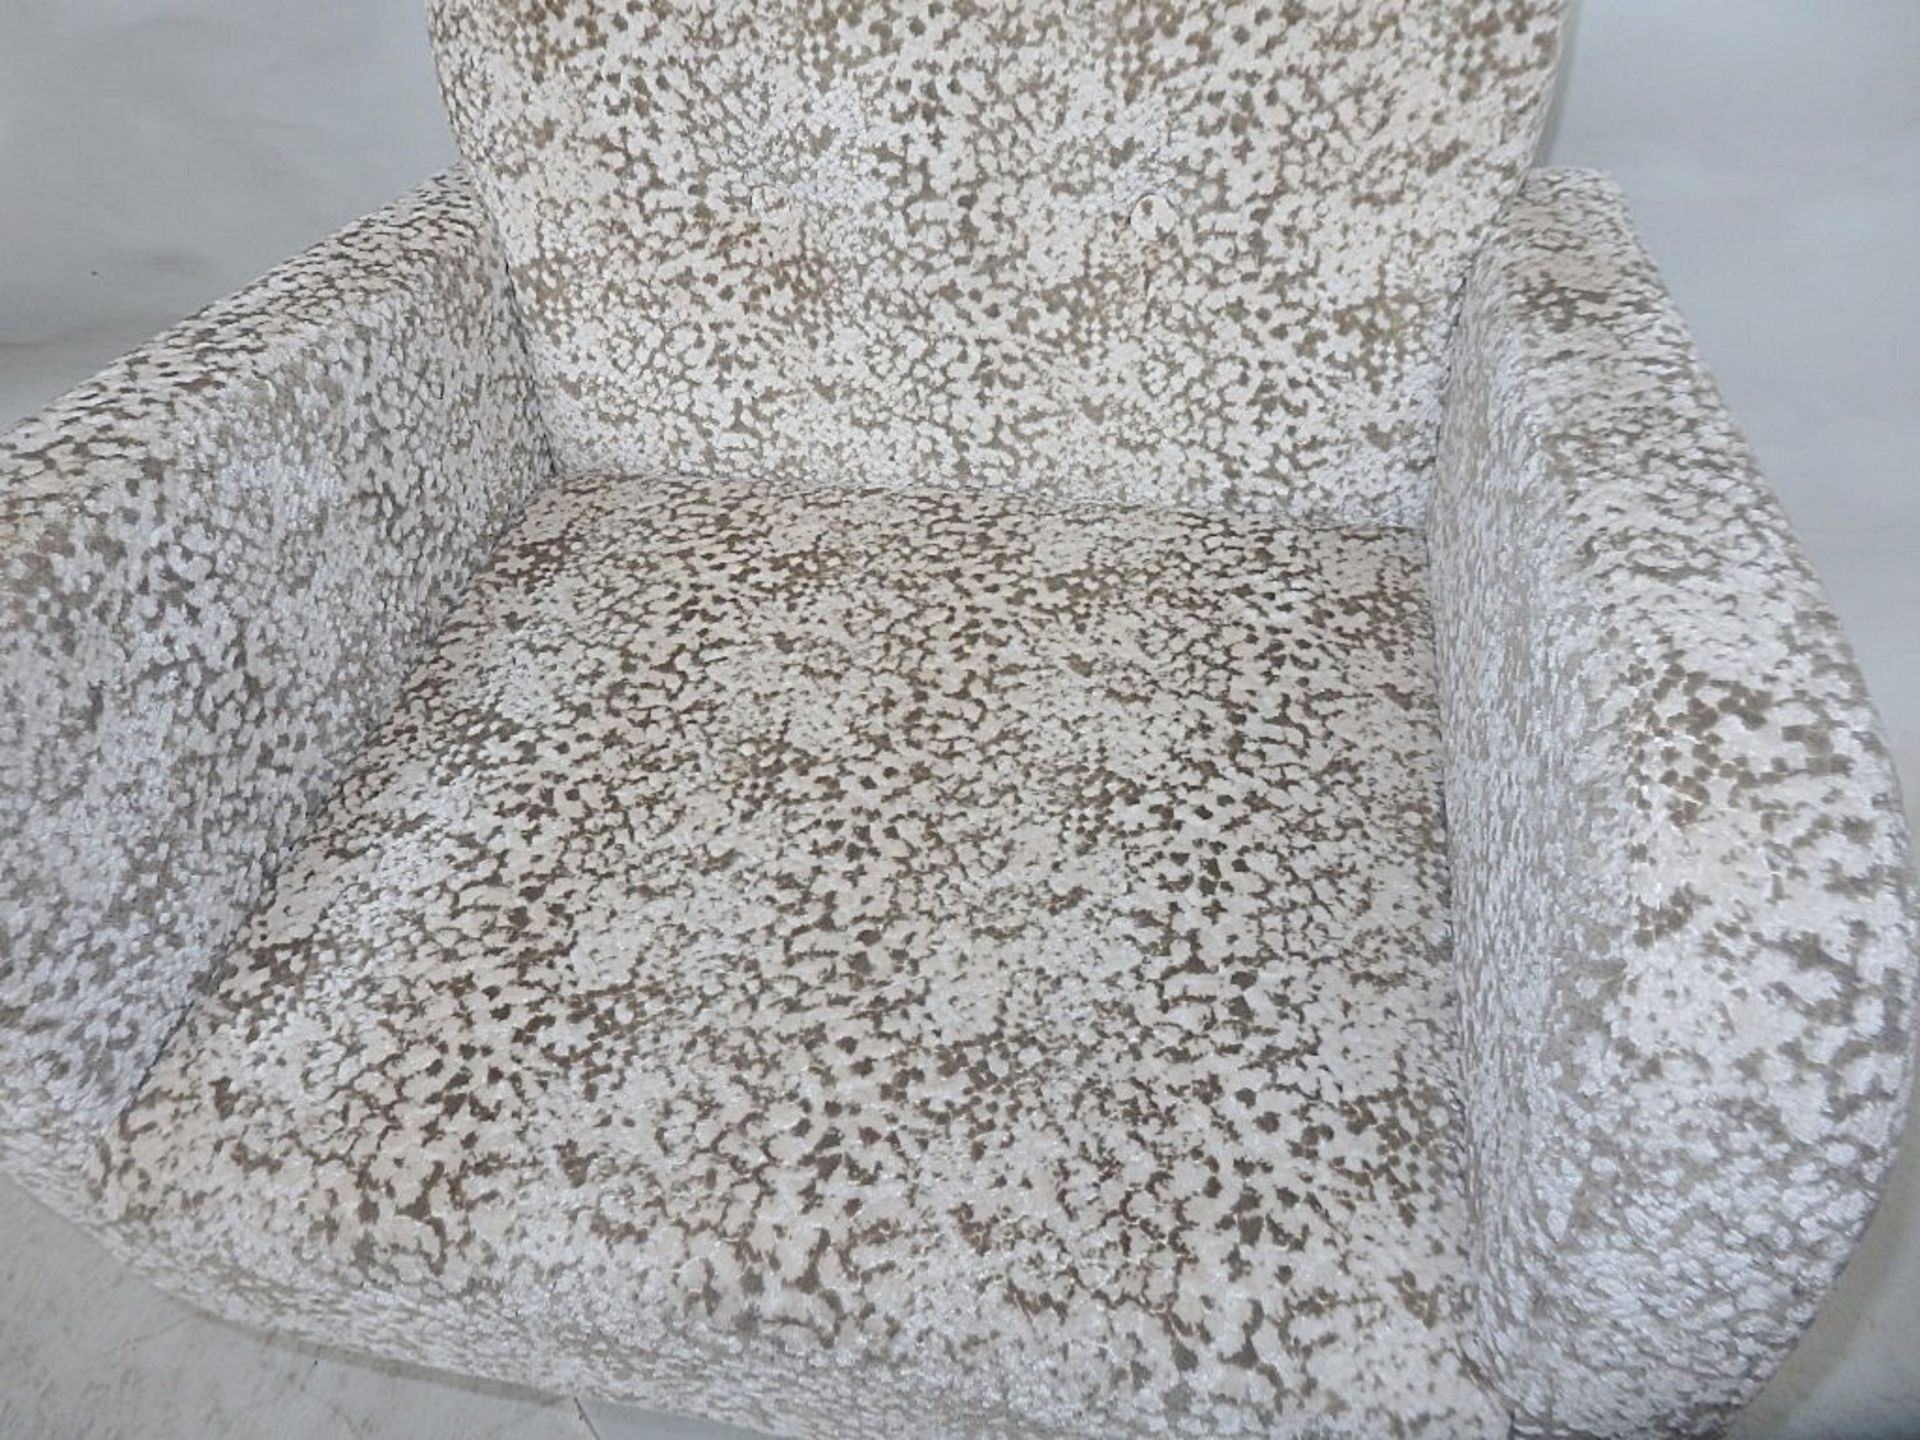 1 x Small Bespoke Swivel Chair - Upholstered In A Rich Mottled Chenille - Dimensions: W x H x D cm - - Image 3 of 5